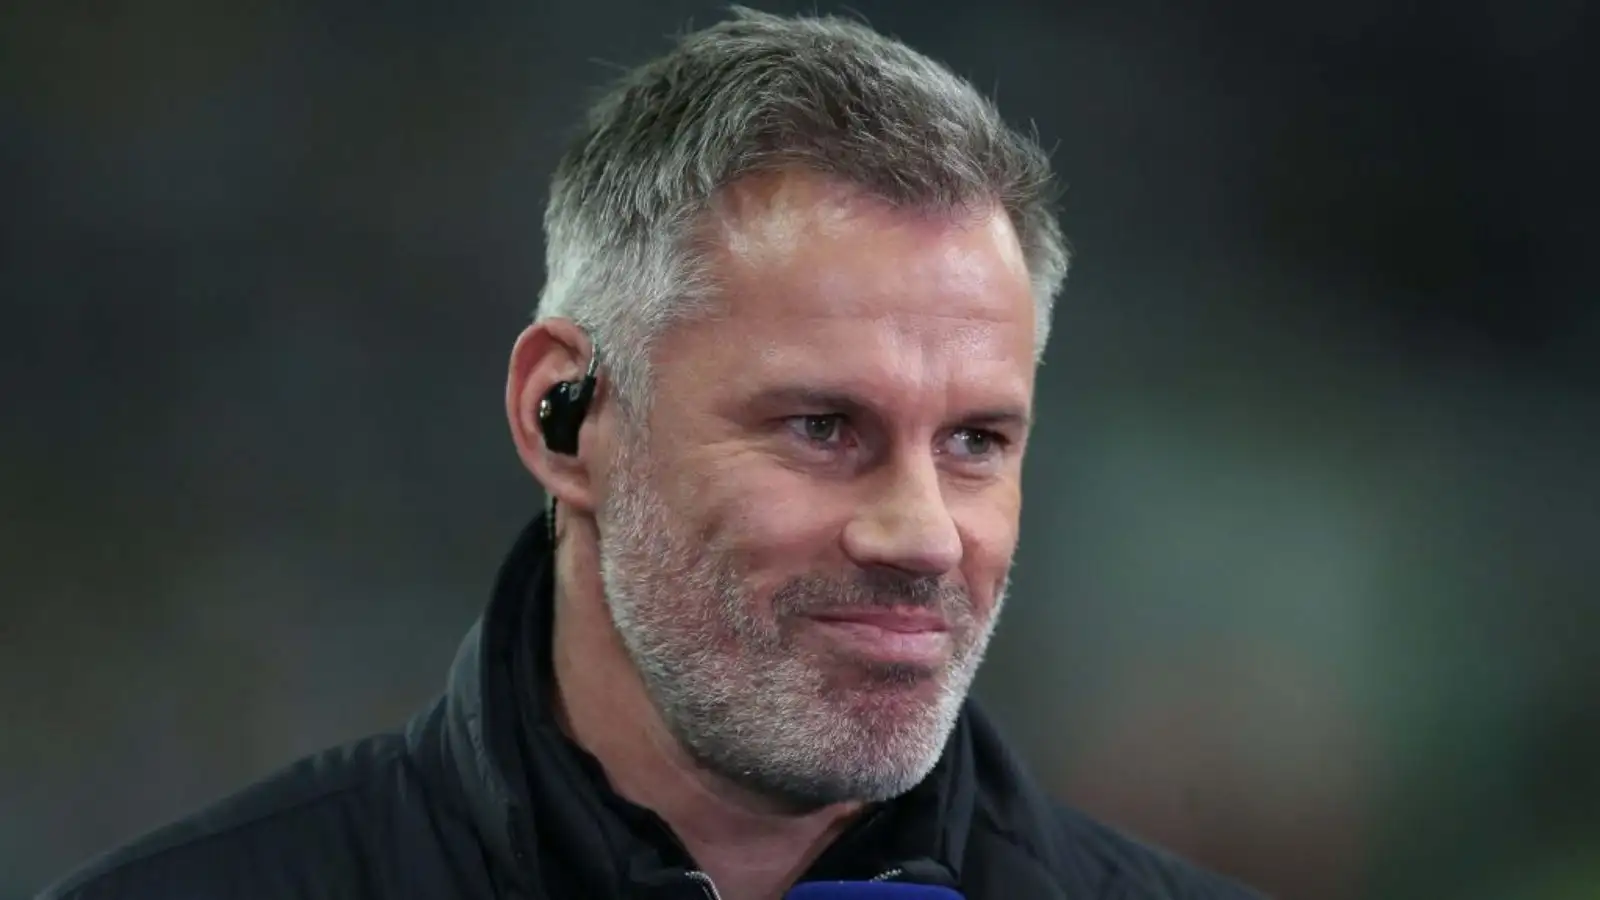 Liverpool legend Jamie Carragher during a Sky Sports broadcast.